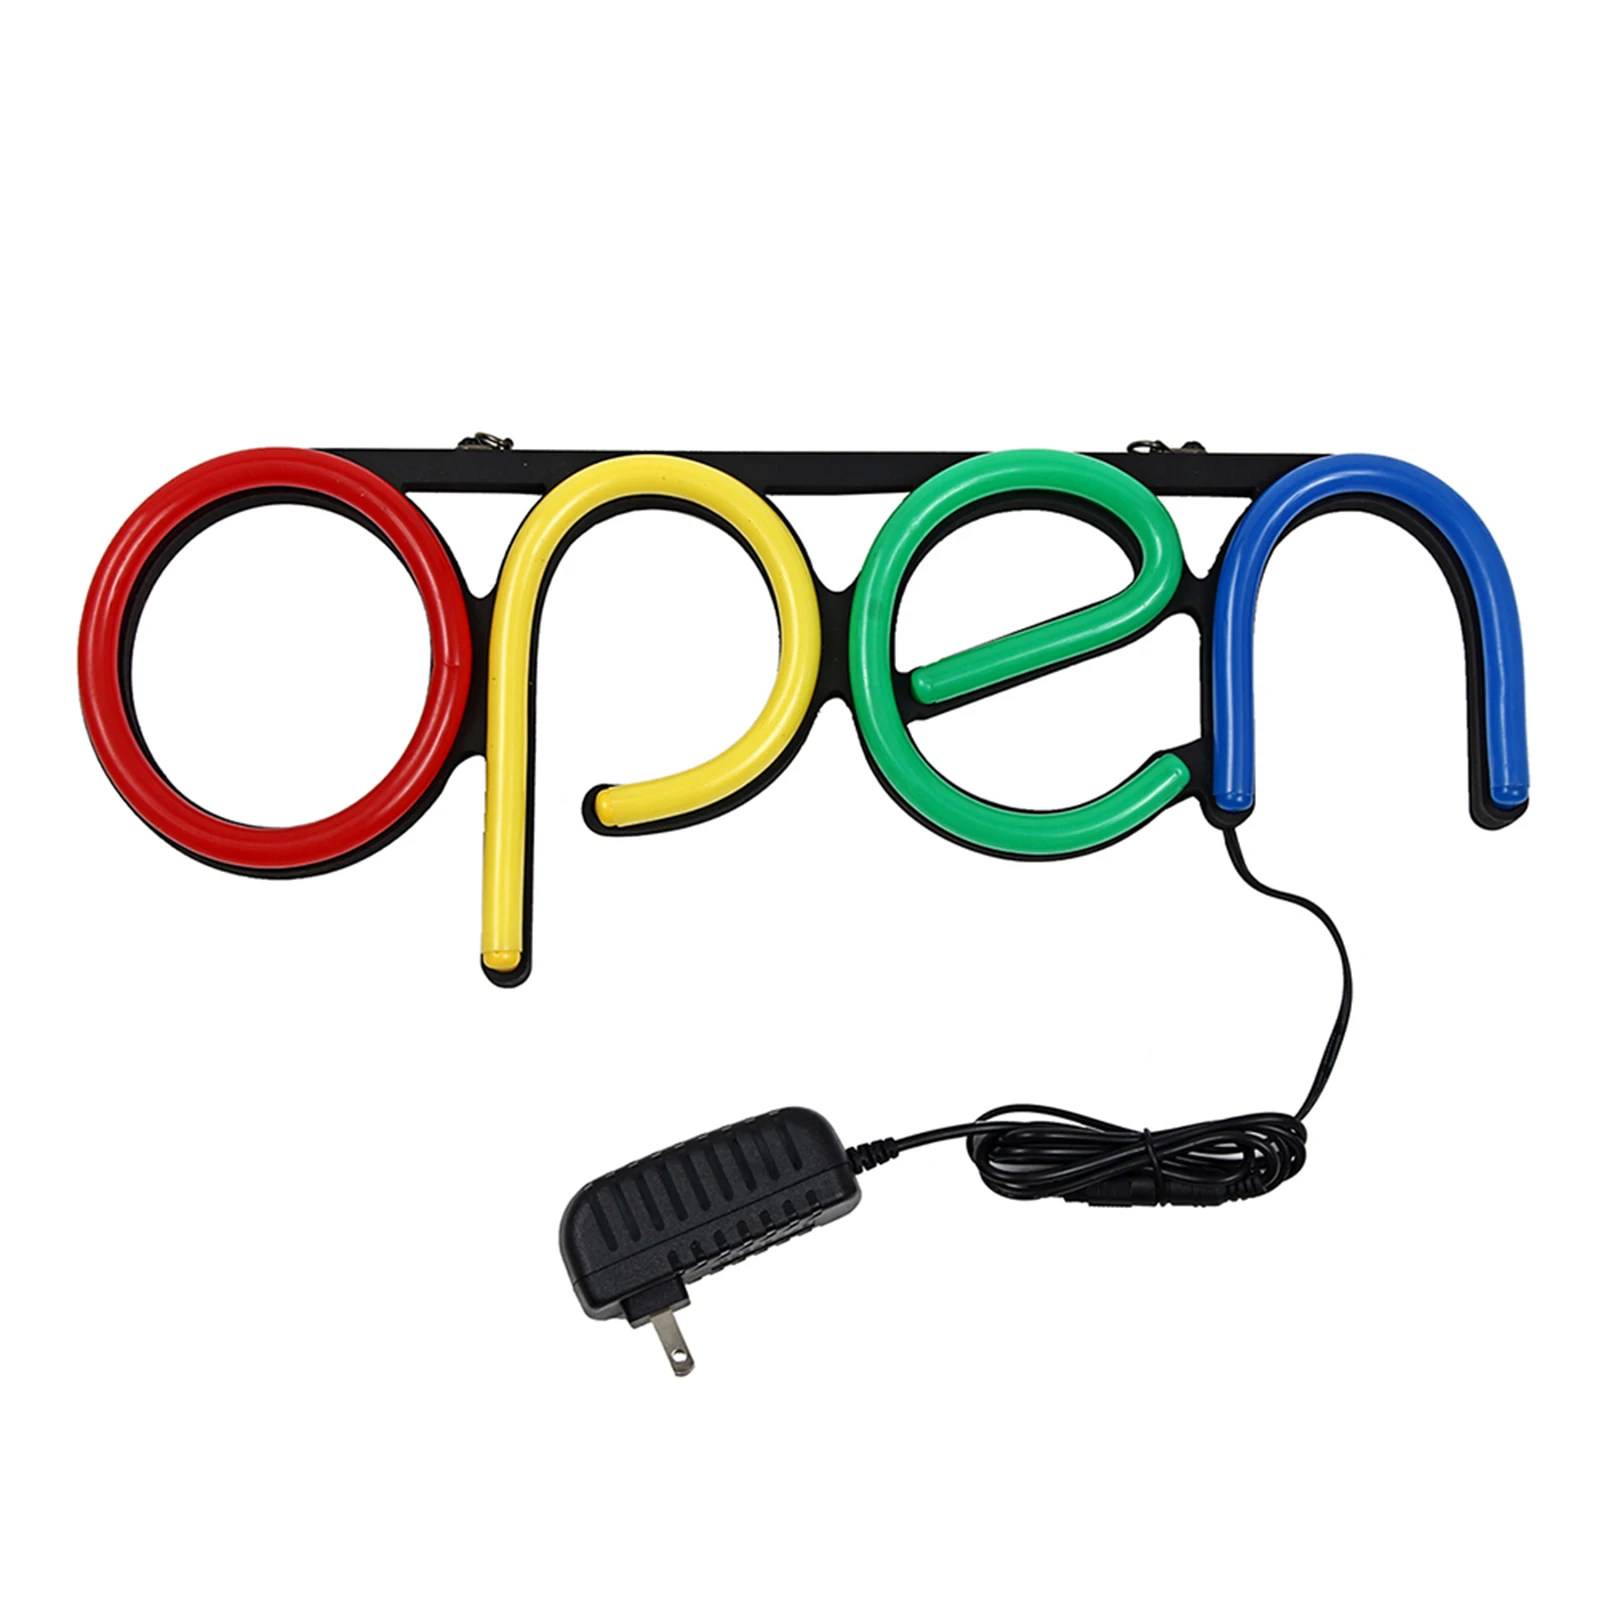 

LED Open Sign Light right High Place Colorful Light for Park Party Festivals Holidays